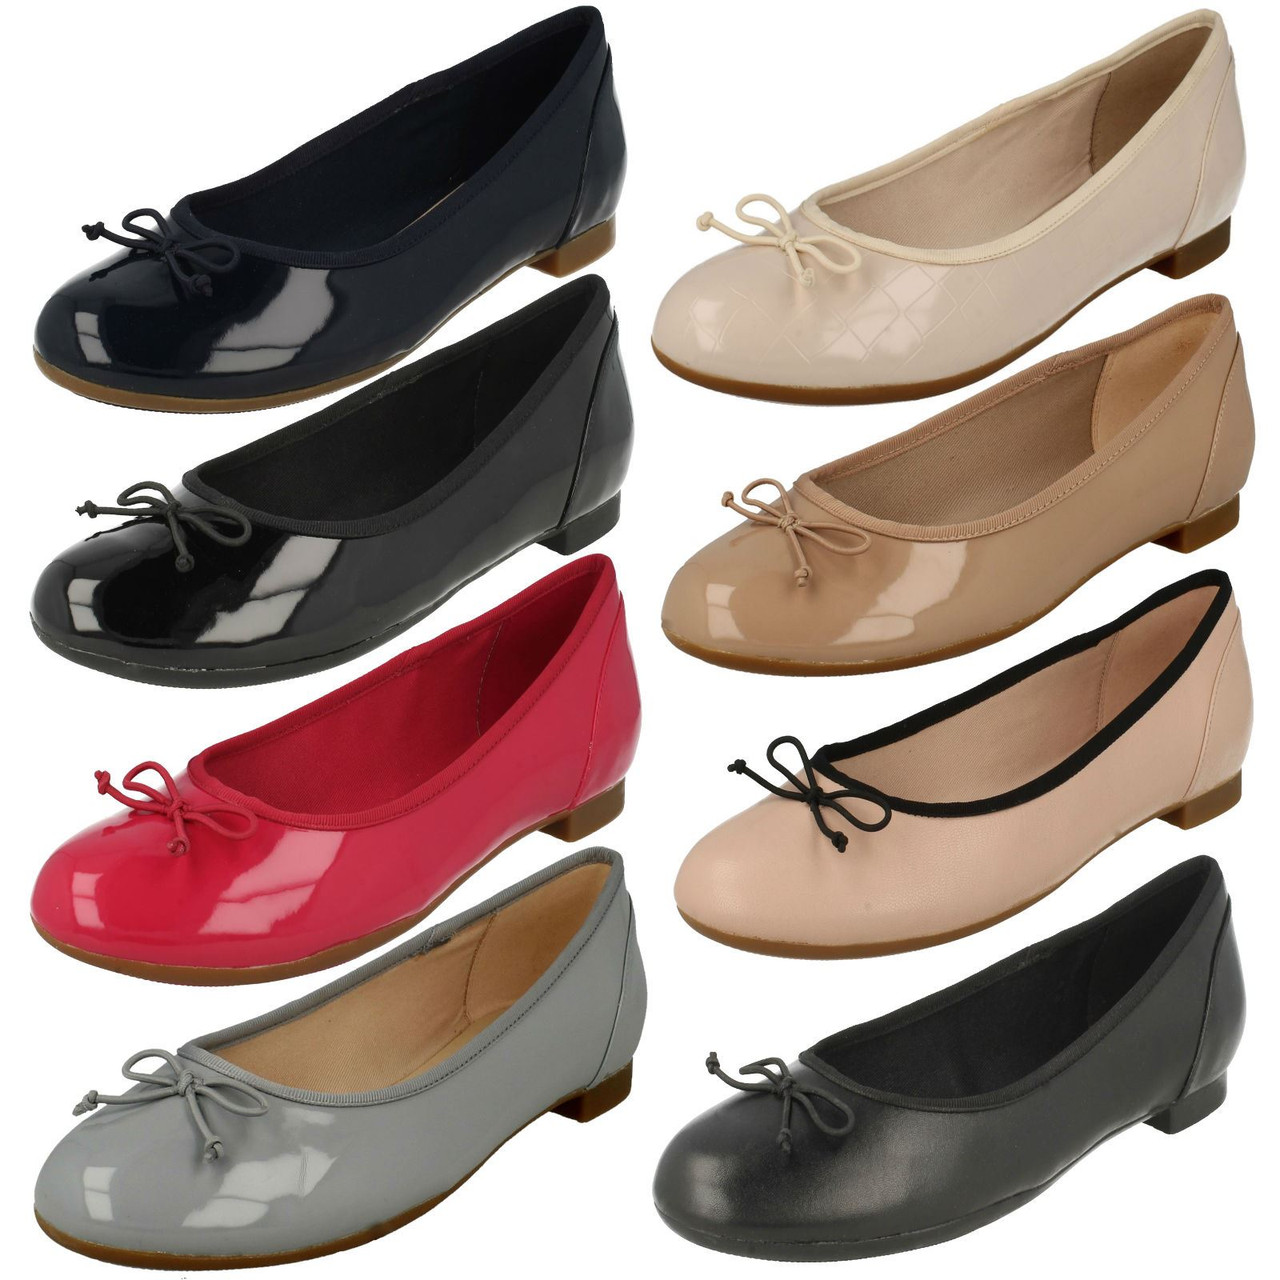 clarks pointed toe flats